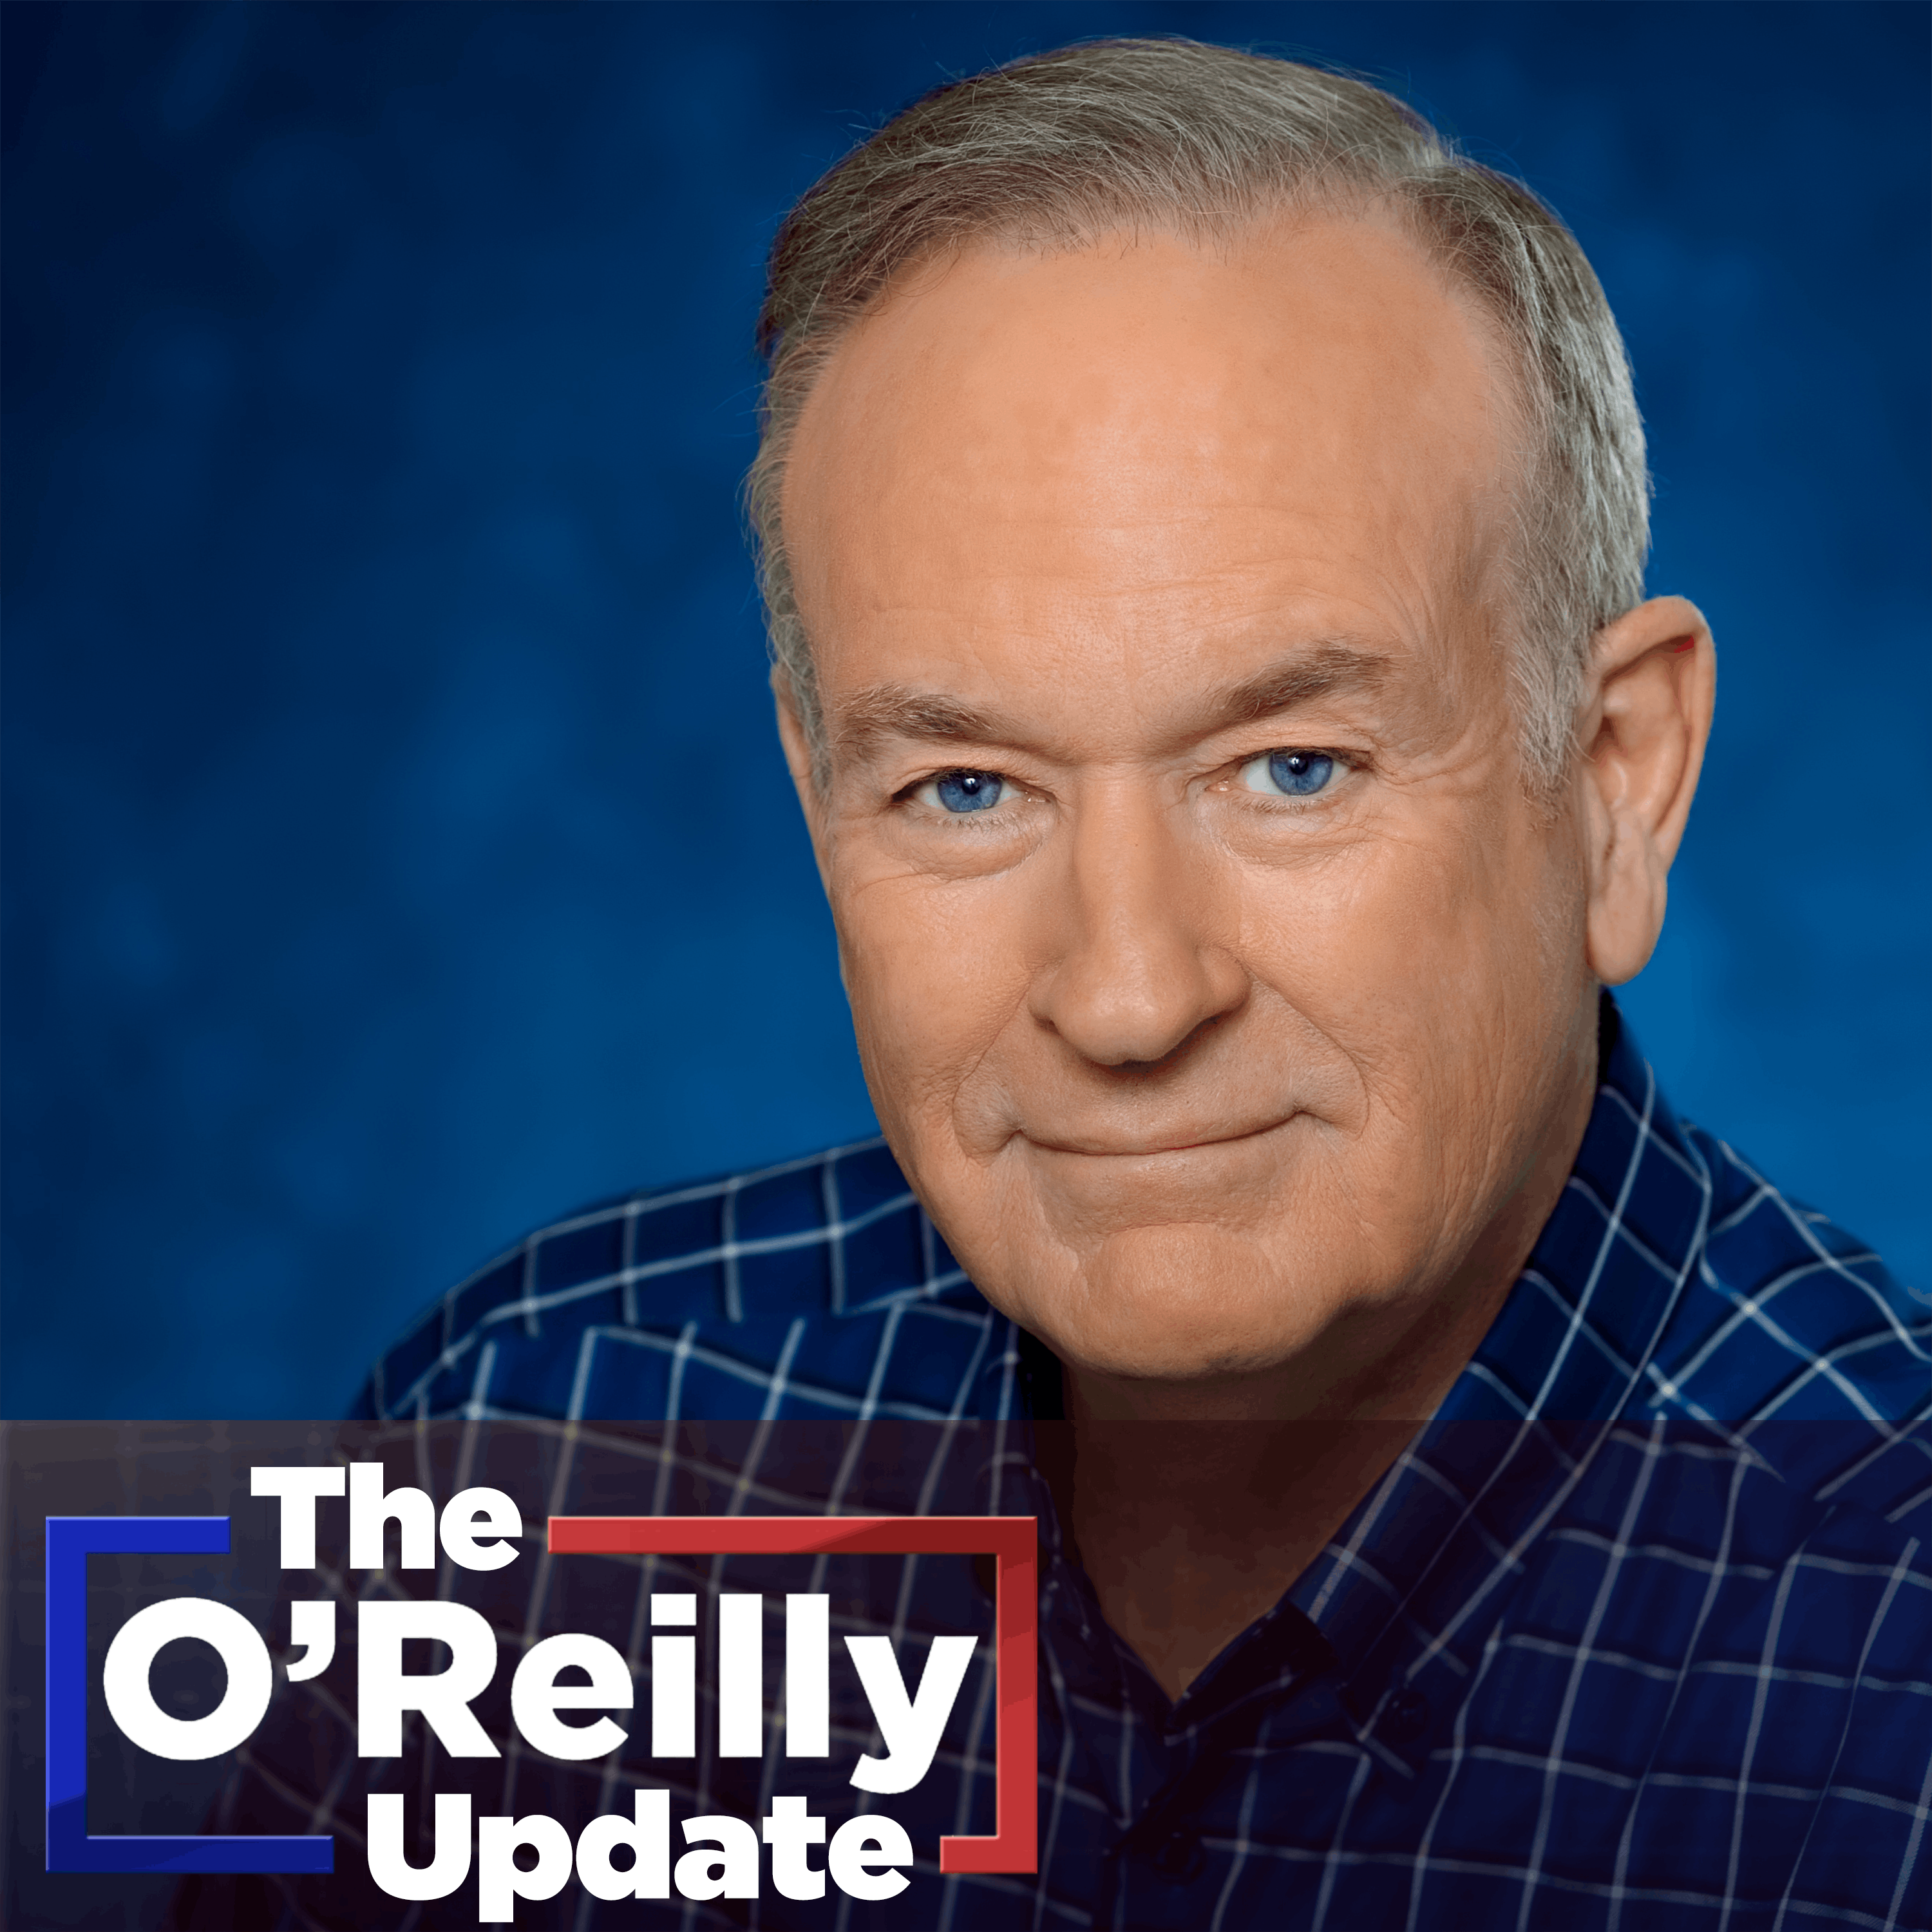 O'Reilly Update Morning Edition, July 27, 2021